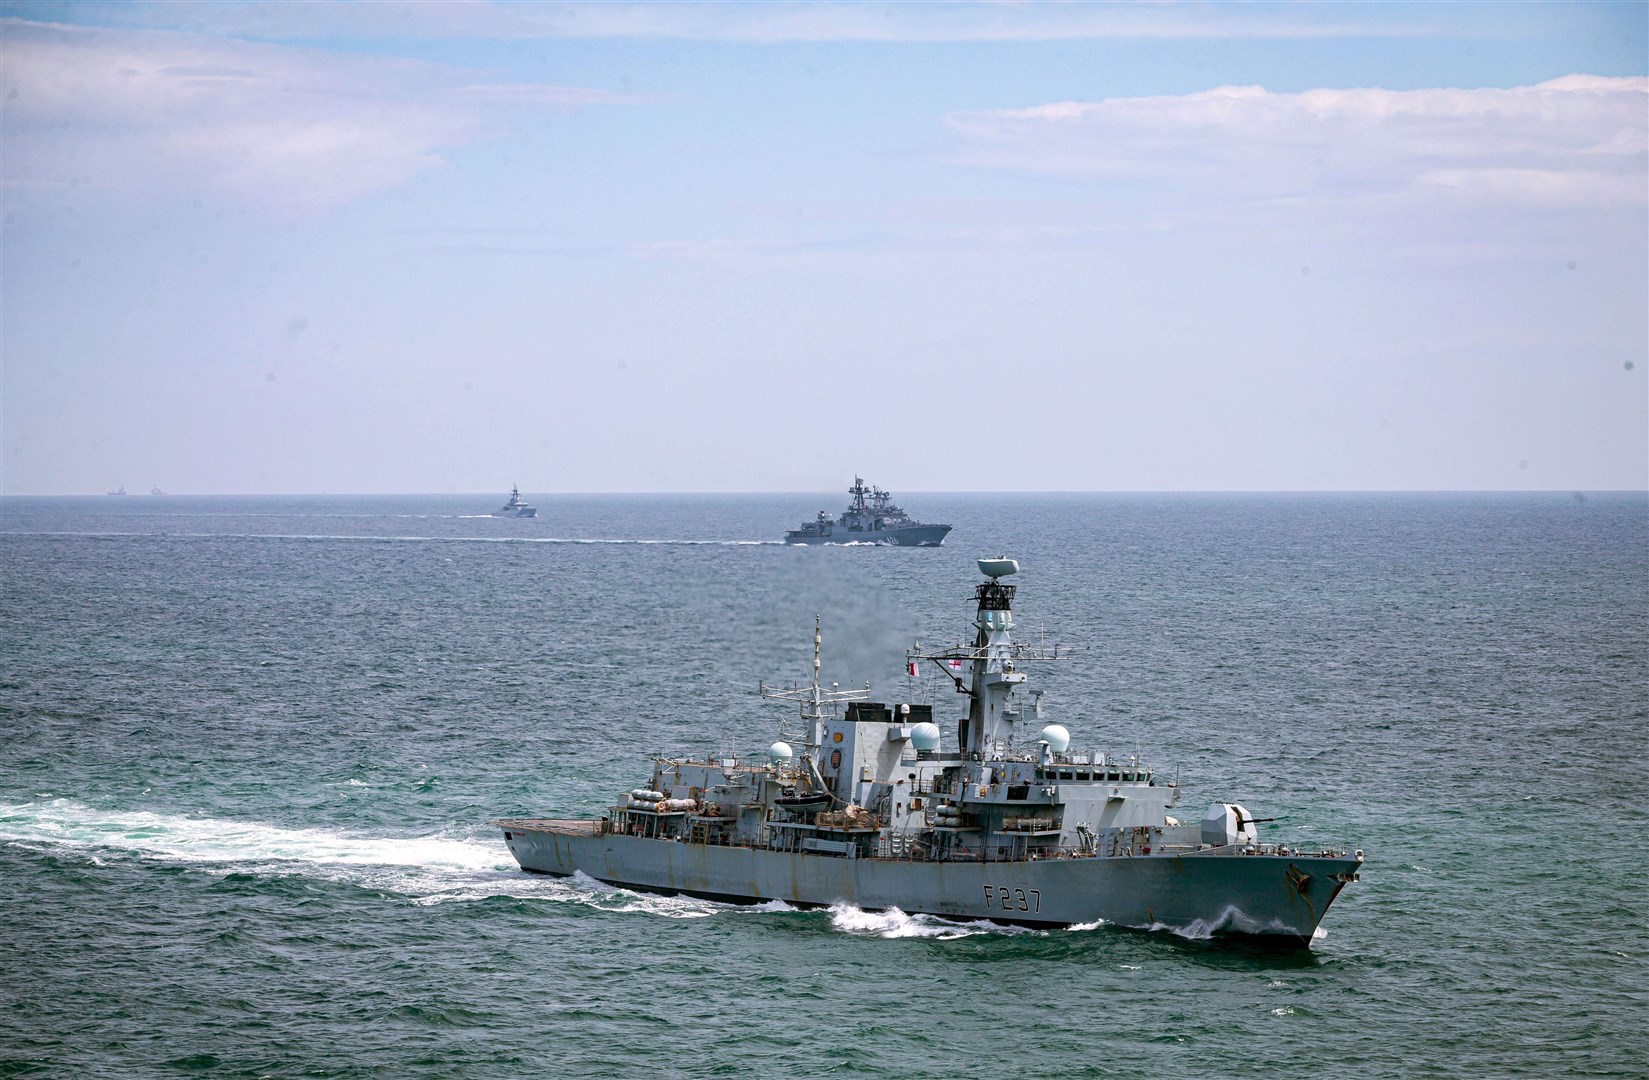 HMS Westminster (nearest the camera) and patrol vessel HMS Tyne (furthest from camera), as they escort Russian warship Vice Admiral Kulakov through the English Channel in June (MoD/PA)